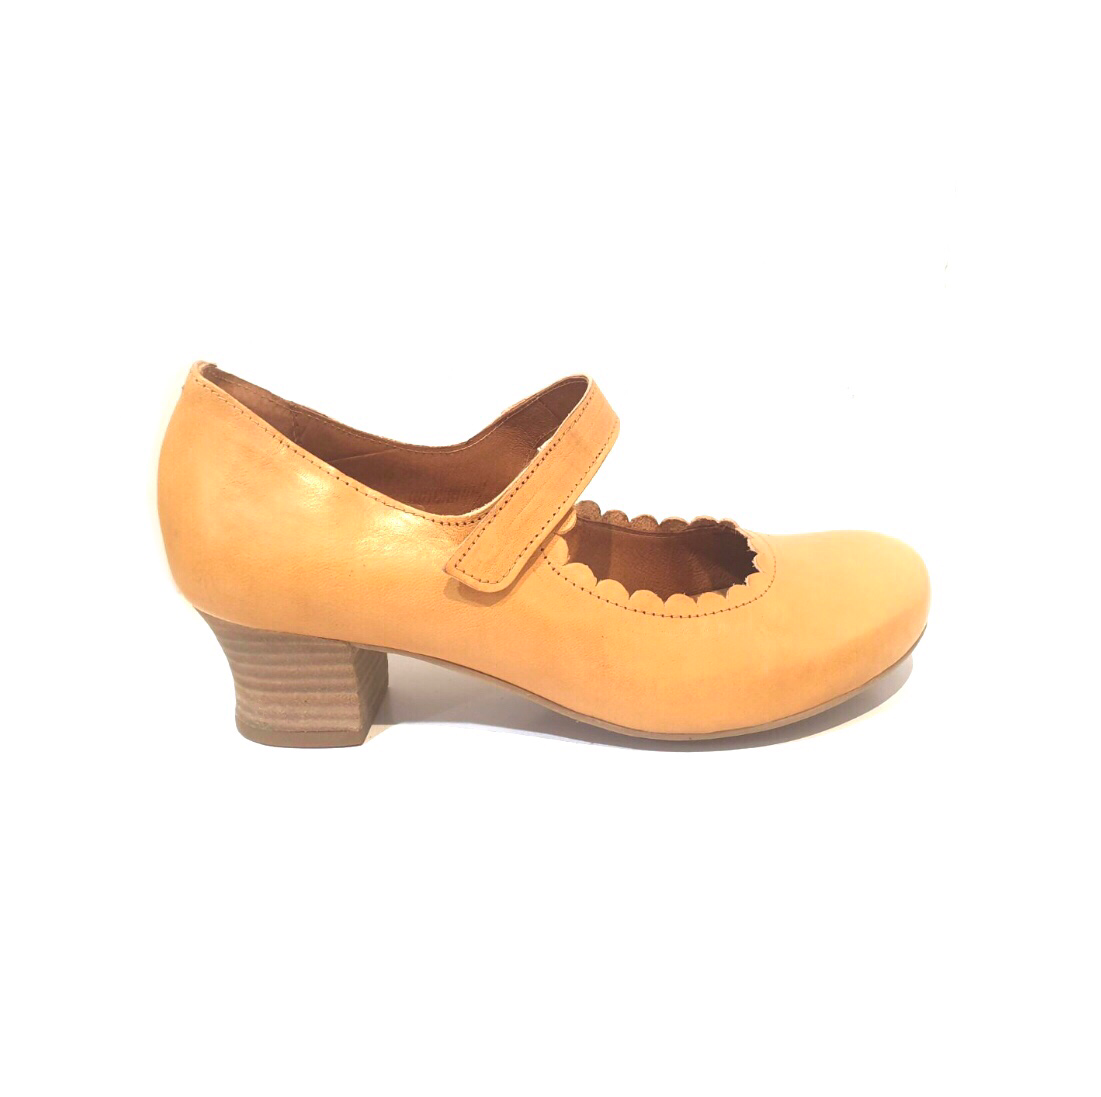 Brako 6174 Minthy Roma Beige Leather Court Shoe Made In Spain